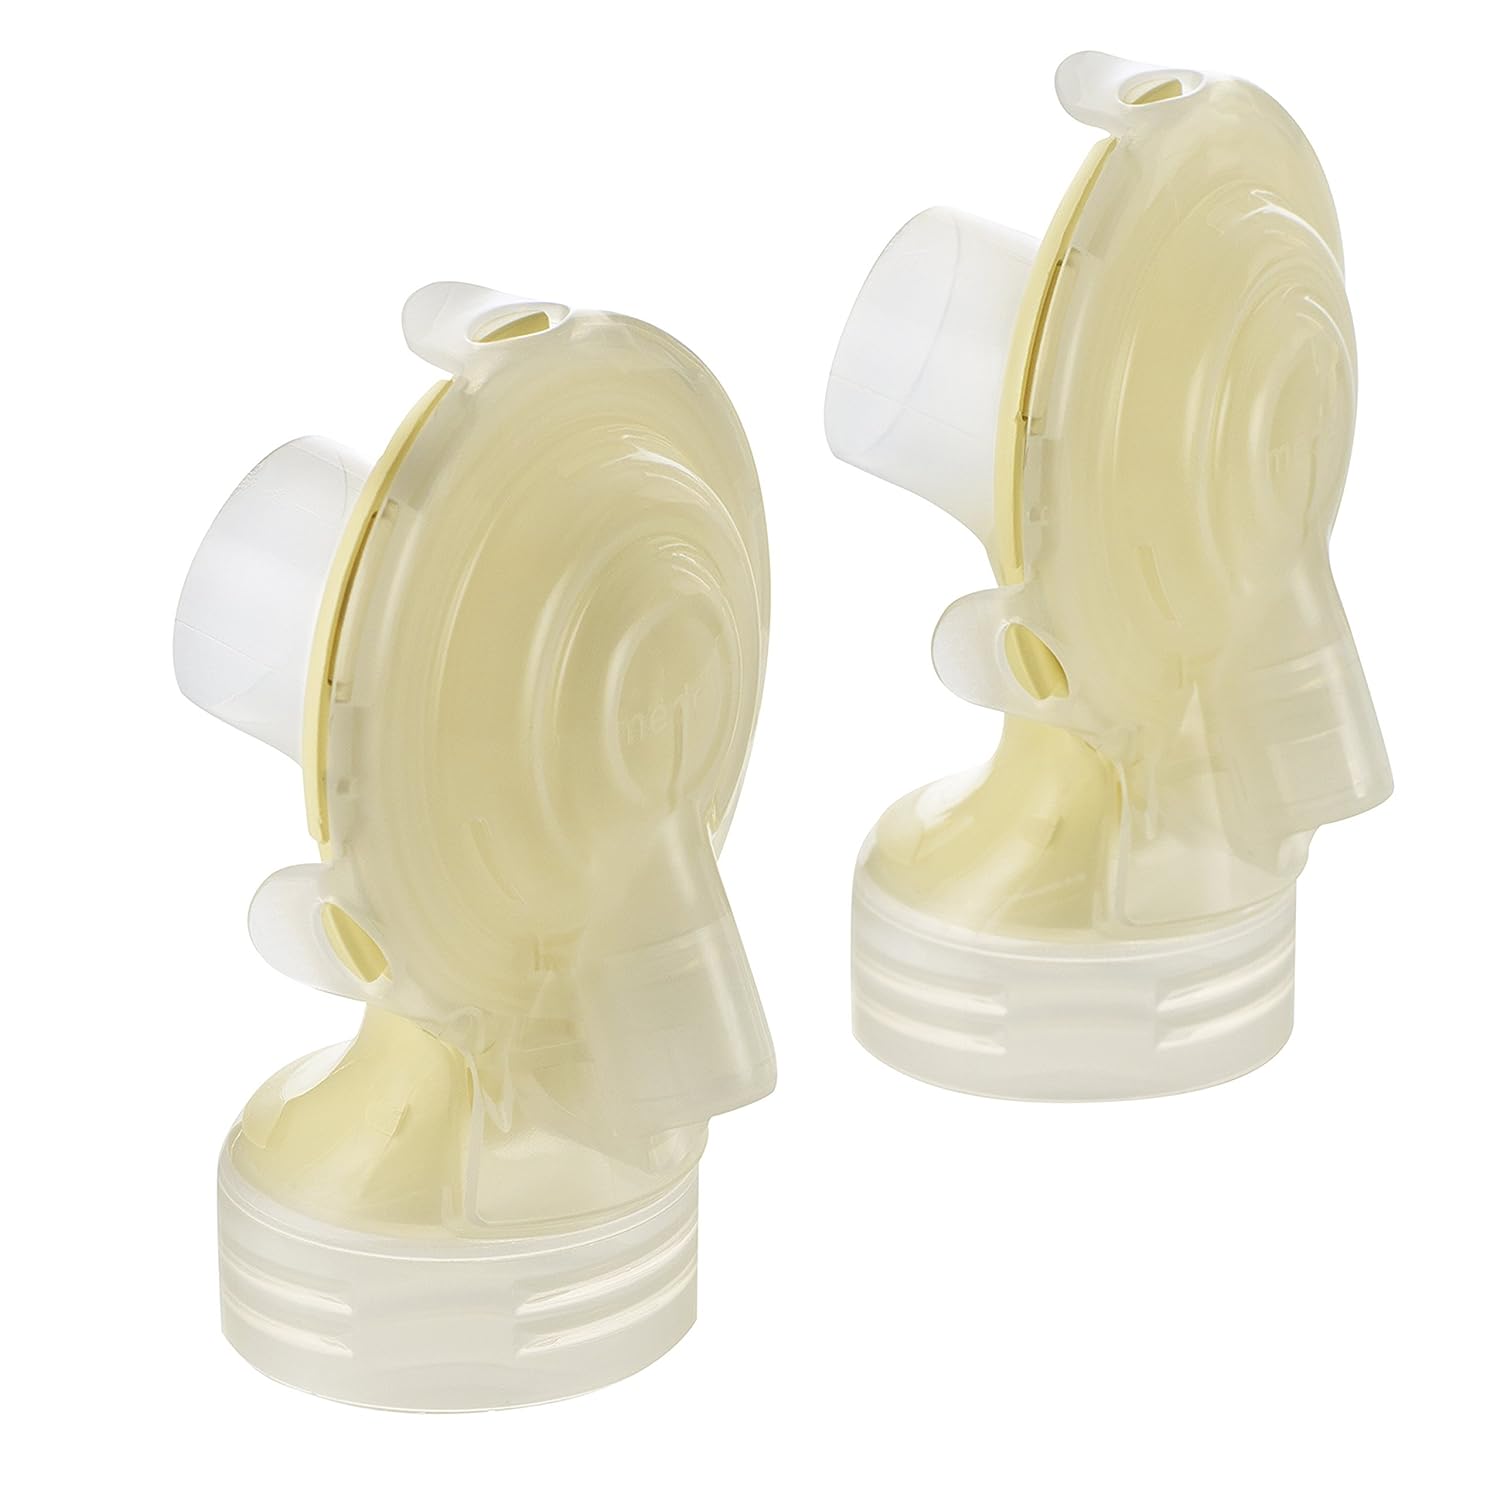 Medela Freestyle Spare Parts Kit, Breast Shield Connectors and Membran – A  Mother's Haven